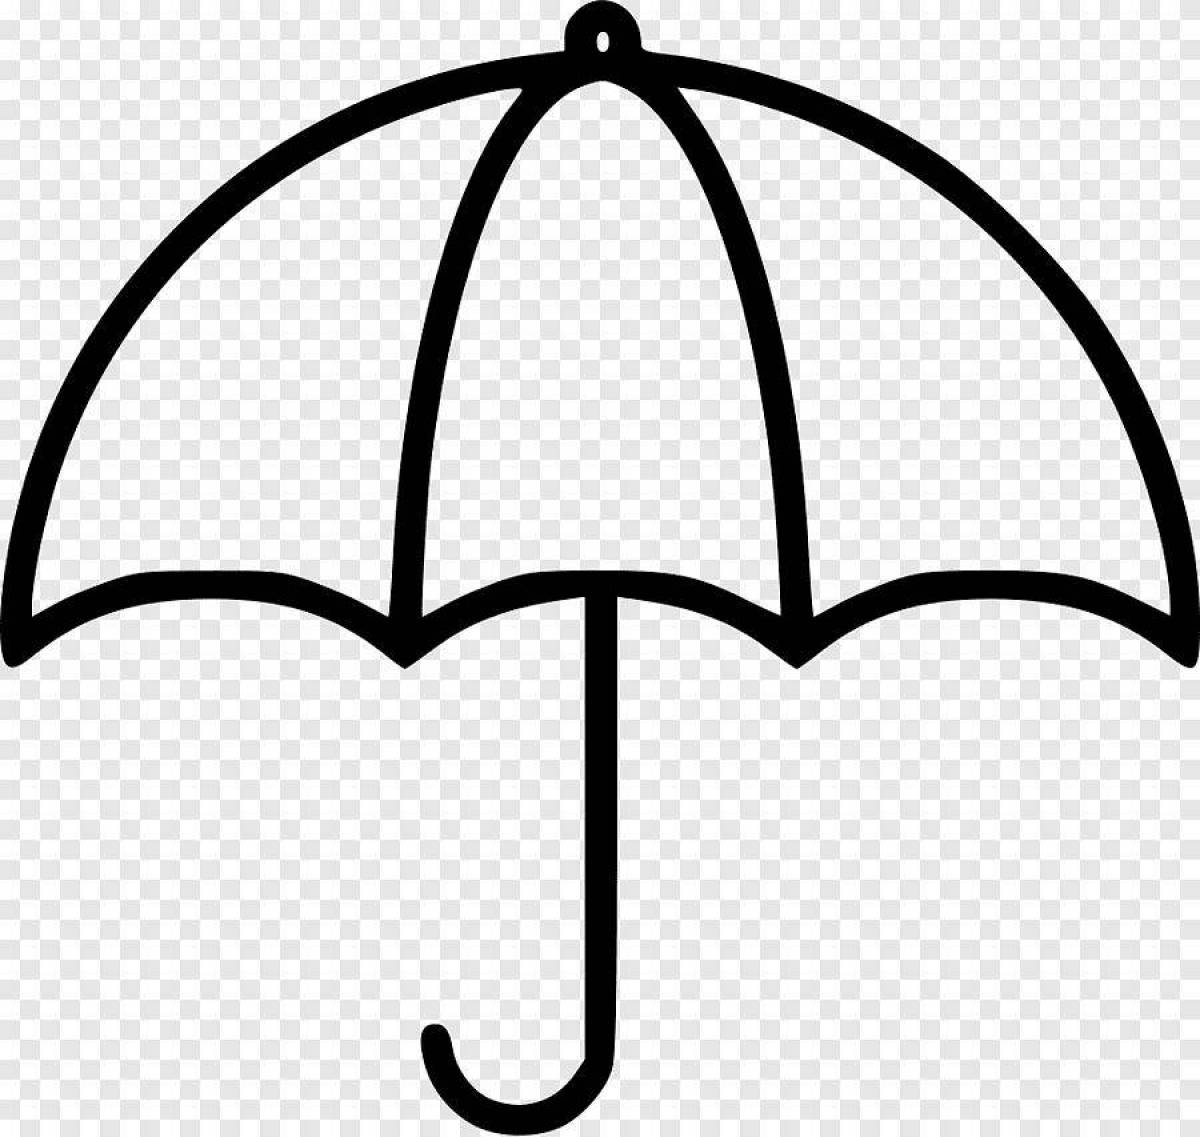 Playful umbrella coloring page for kids